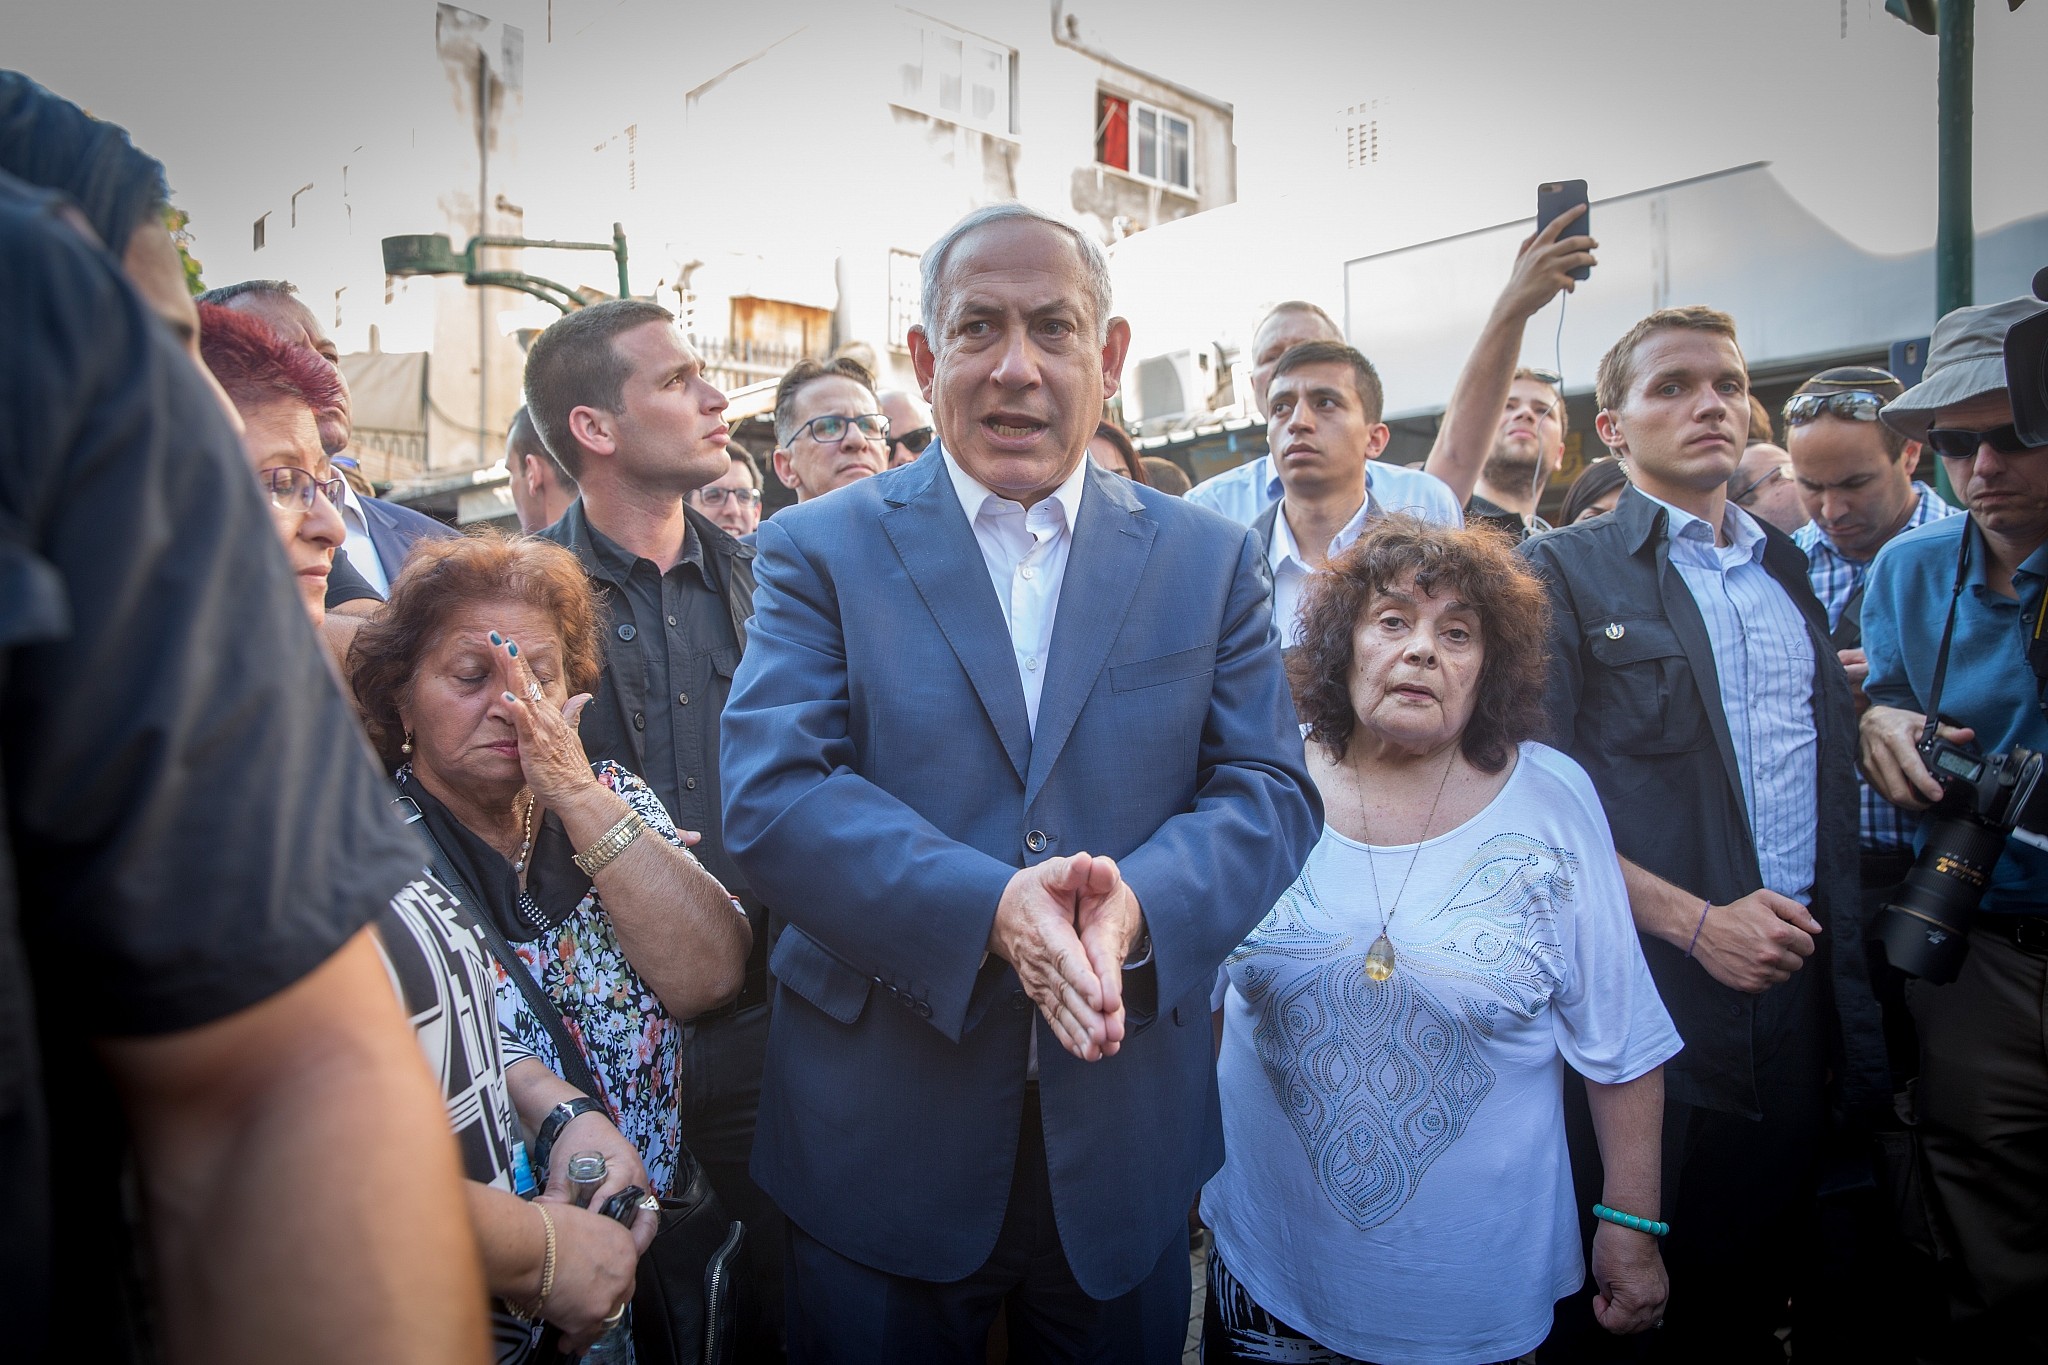 Prime Minister Benjamin Netanyahu meets with residents of south Tel Aviv, during a tour in the neighborhood, August 31, 2017. (Miriam Alster/Flash90)